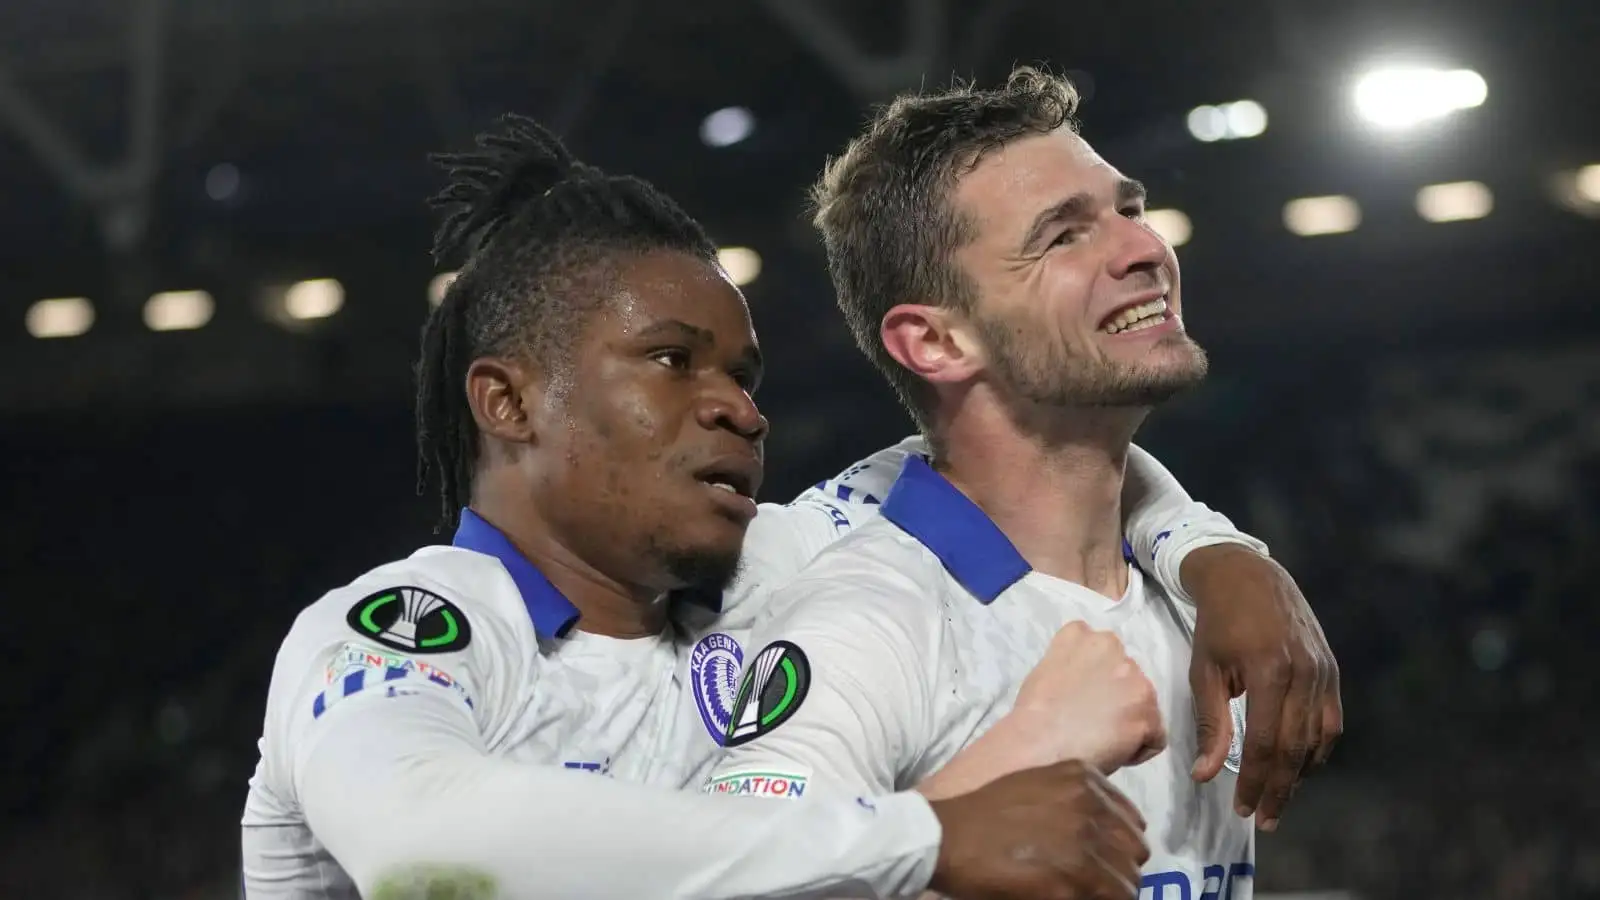 Gent's Hugo Cuyper, right, celebrates Gent's Gift Emmanuel Orban after scoring his side's opening goal during the Conference League soccer match between West Ham and Gent at the London stadium in London, England